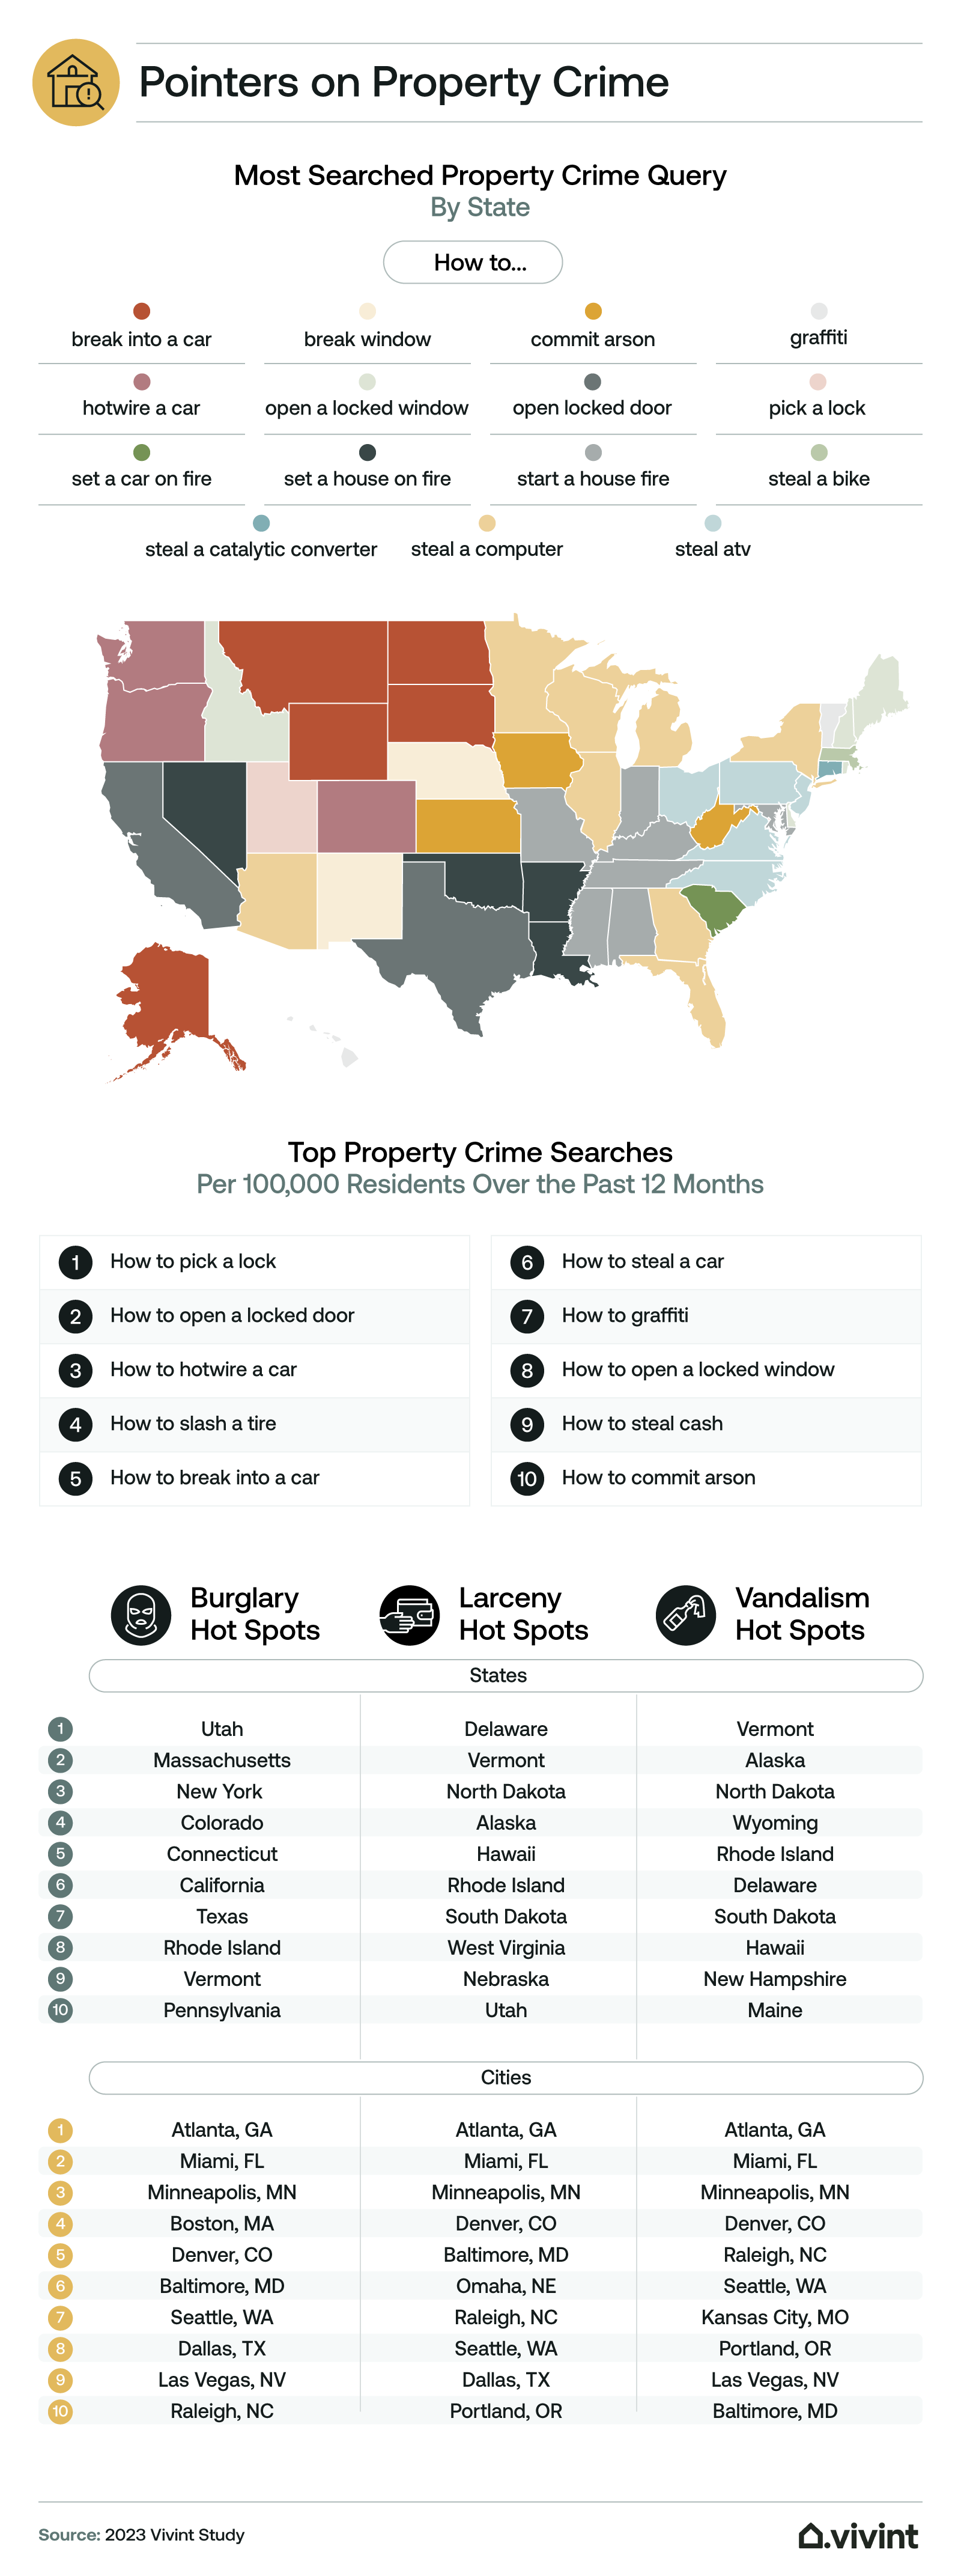 Information about which states are searching for information about property crime.